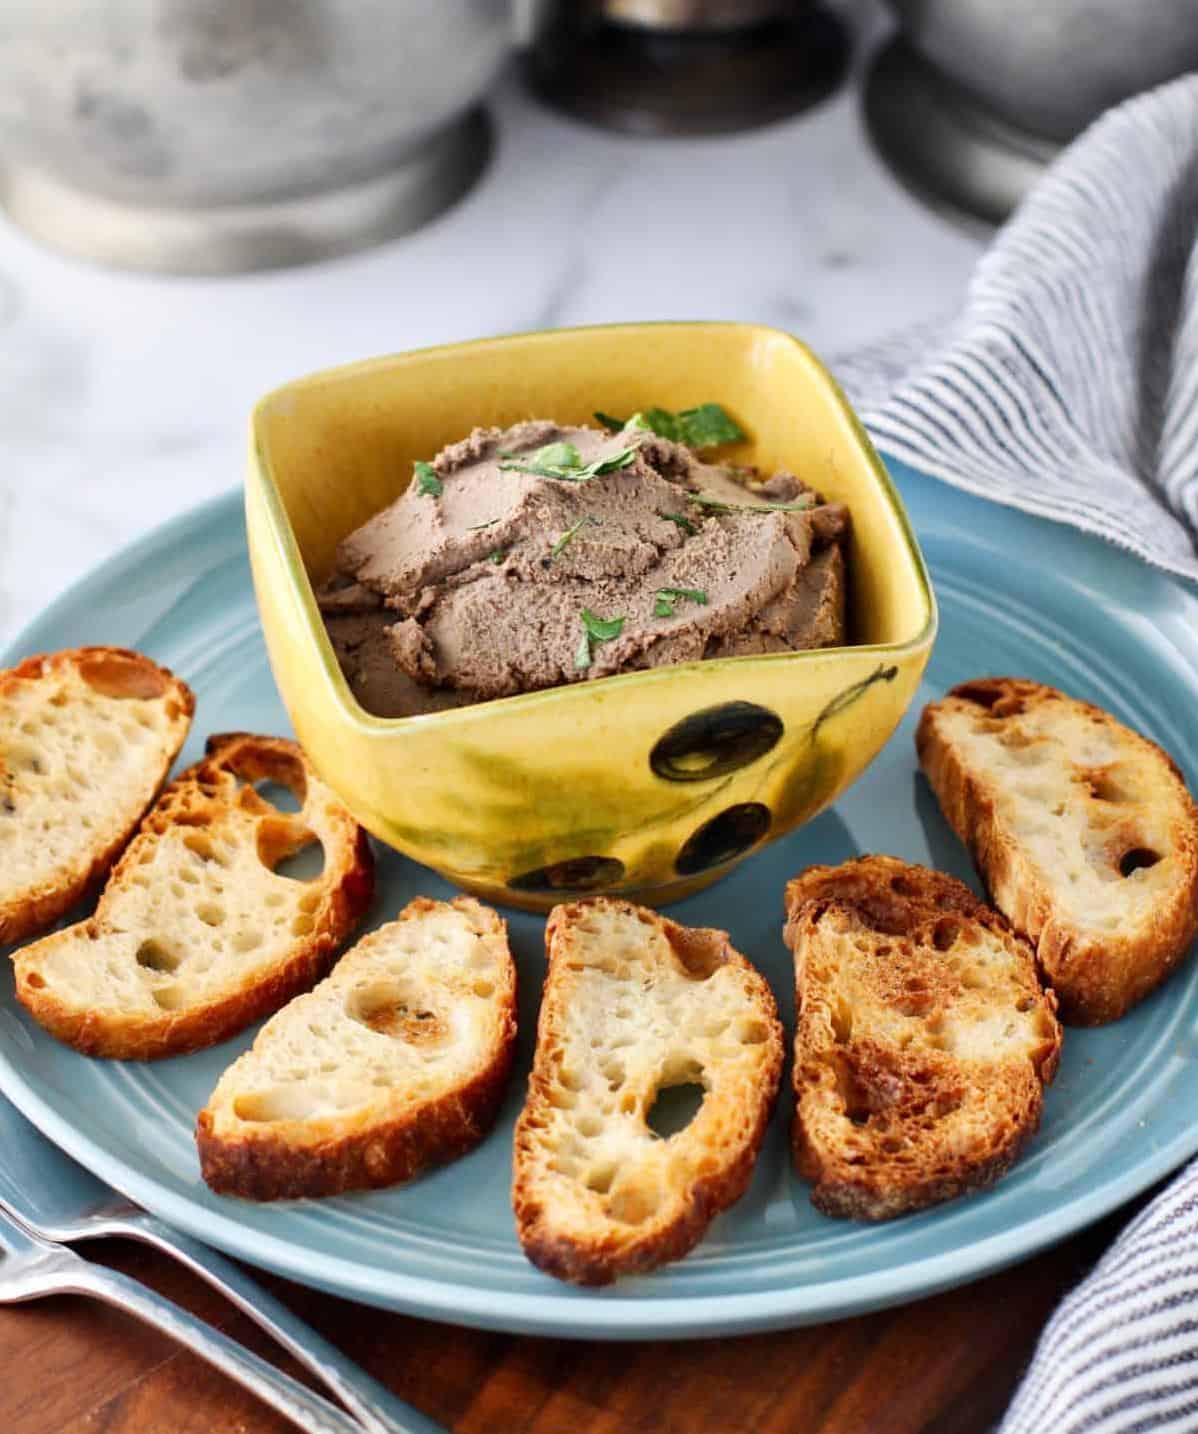  Don't judge a book by its cover- this pate might not be the prettiest, but it sure is delicious